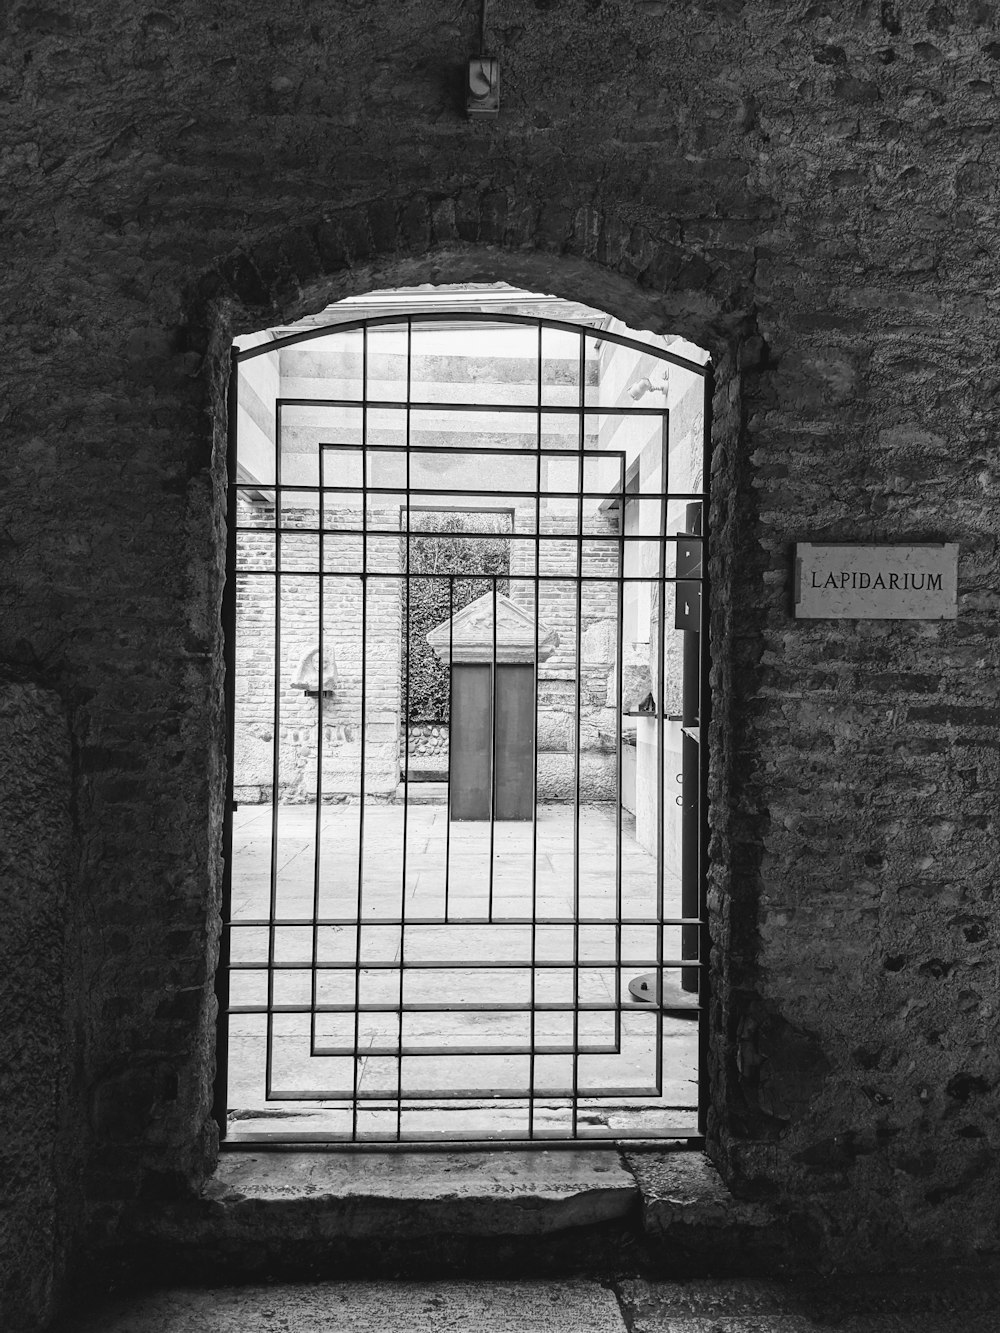 a black and white photo of a jail cell